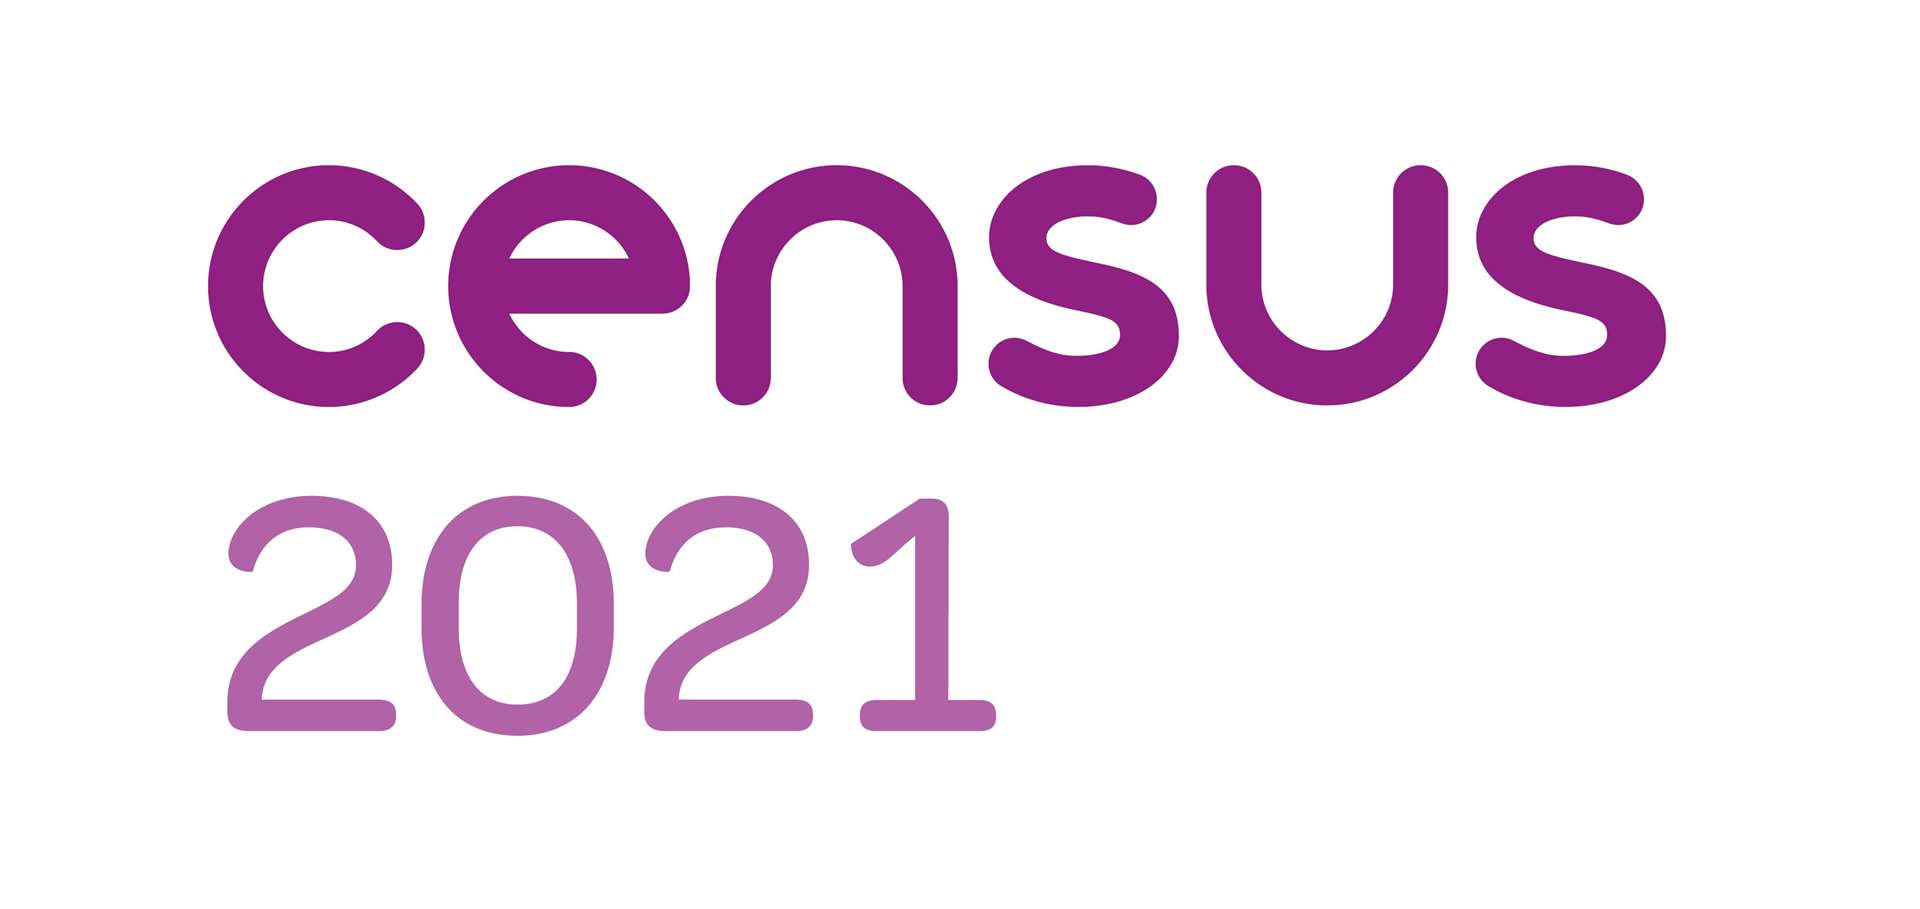 Census Day 2021 is Sunday, March 21